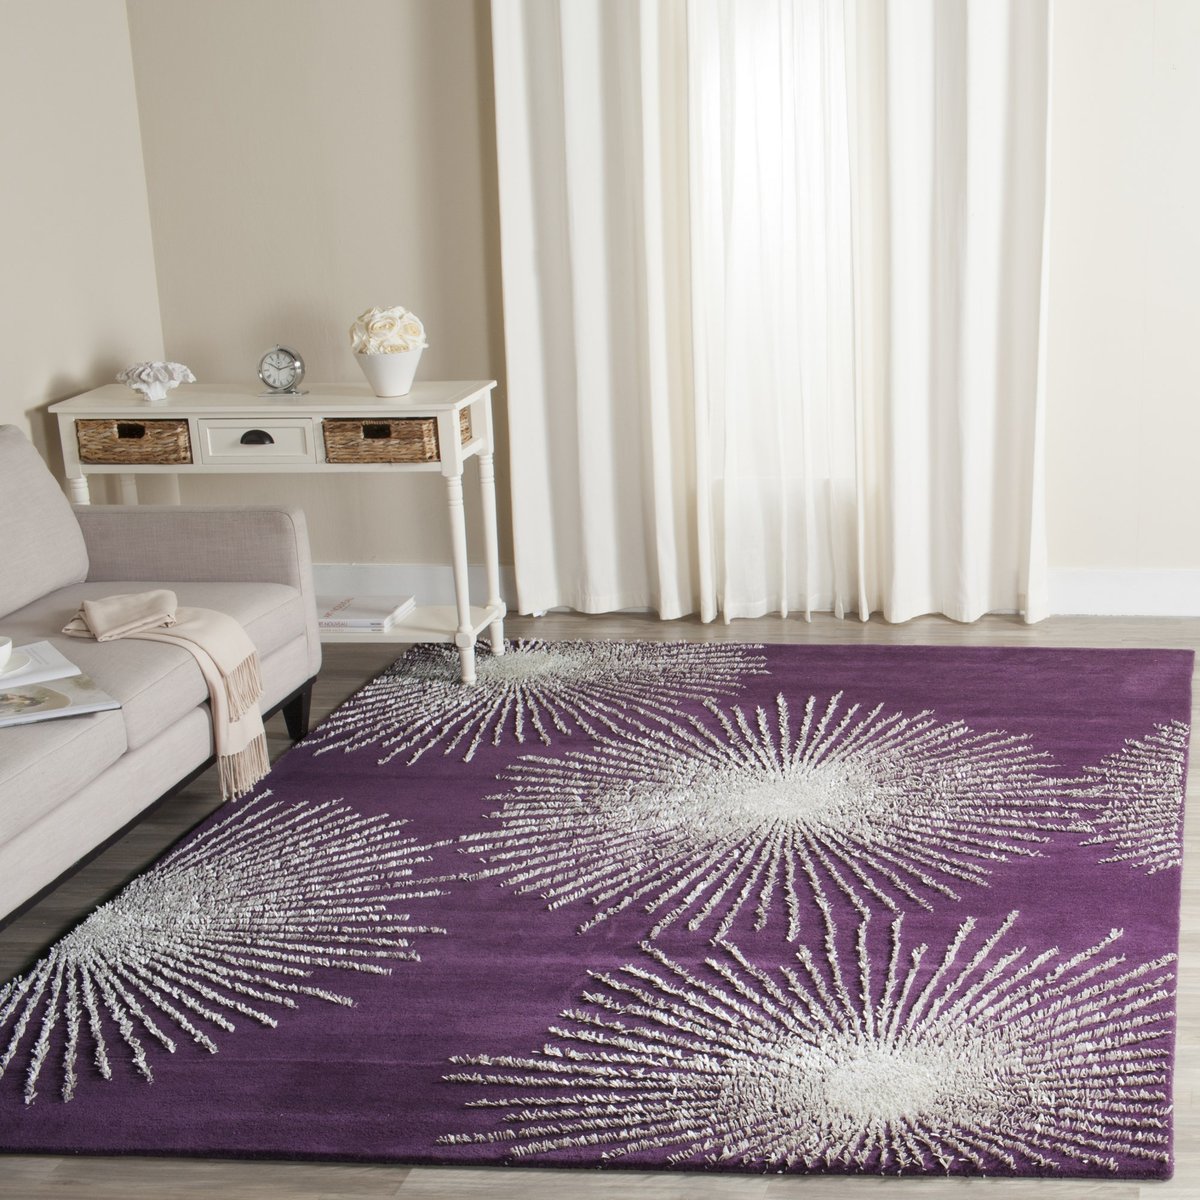 Small Sizes Contemporary Purple Violet Black Floral Modern Room Rug Rugs Large 